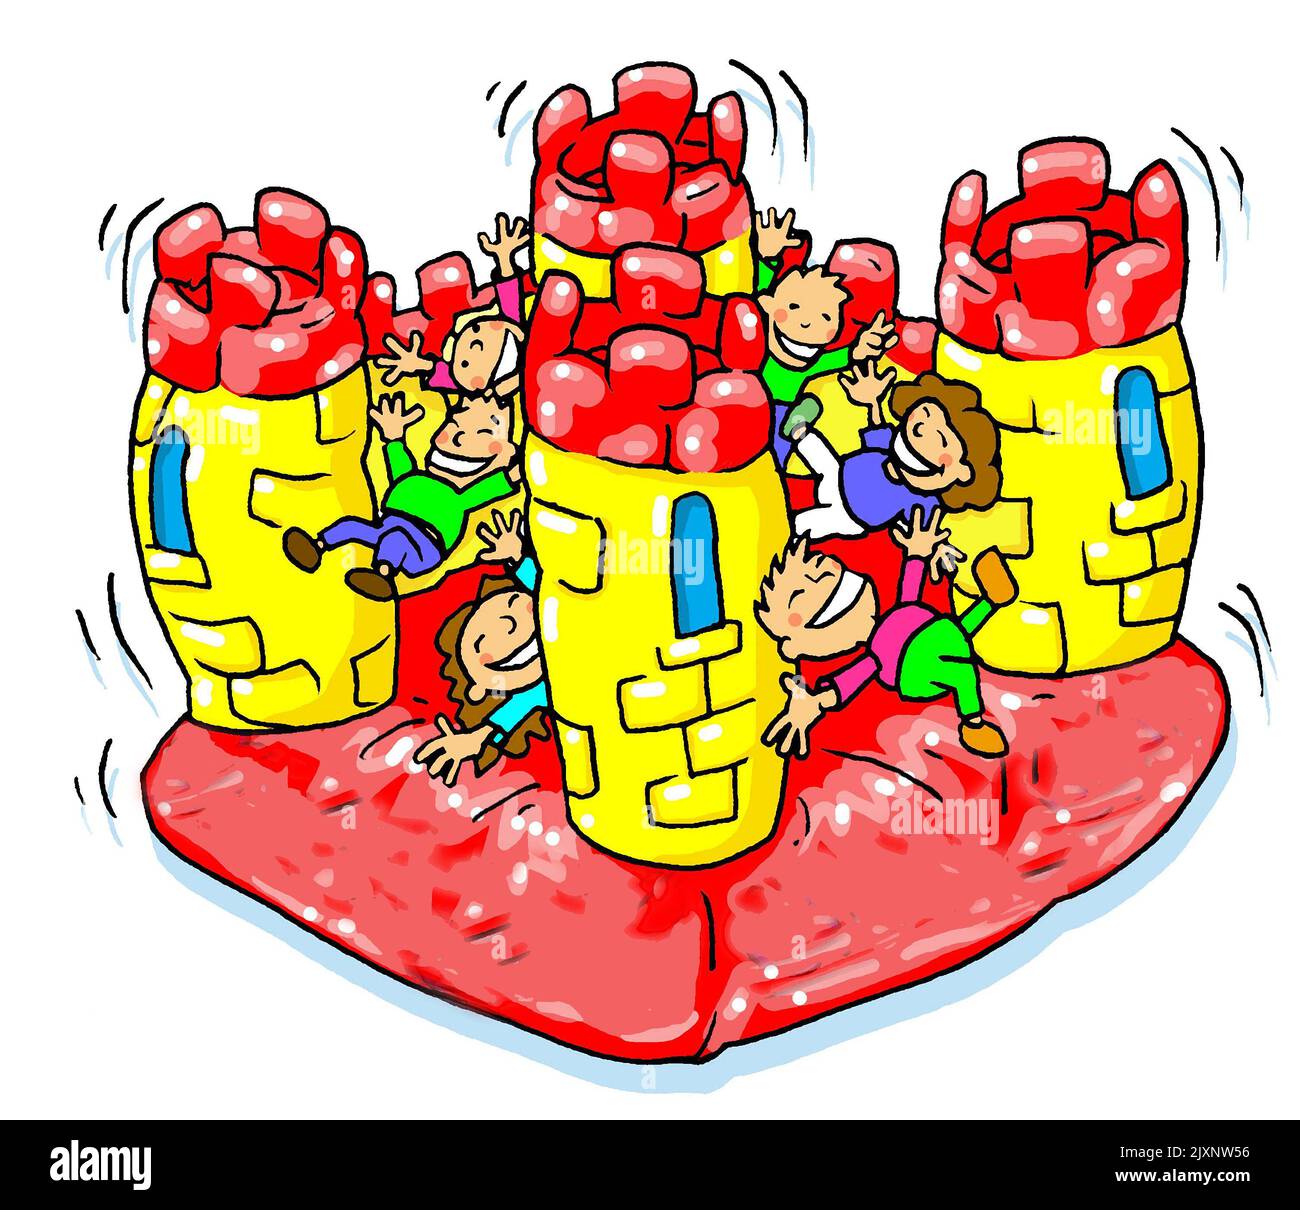 Cartoon art illustration showing group of young children, boys and girls, having fun, playing on an inflatable bouncy castle. Festivals, village fetes Stock Photo